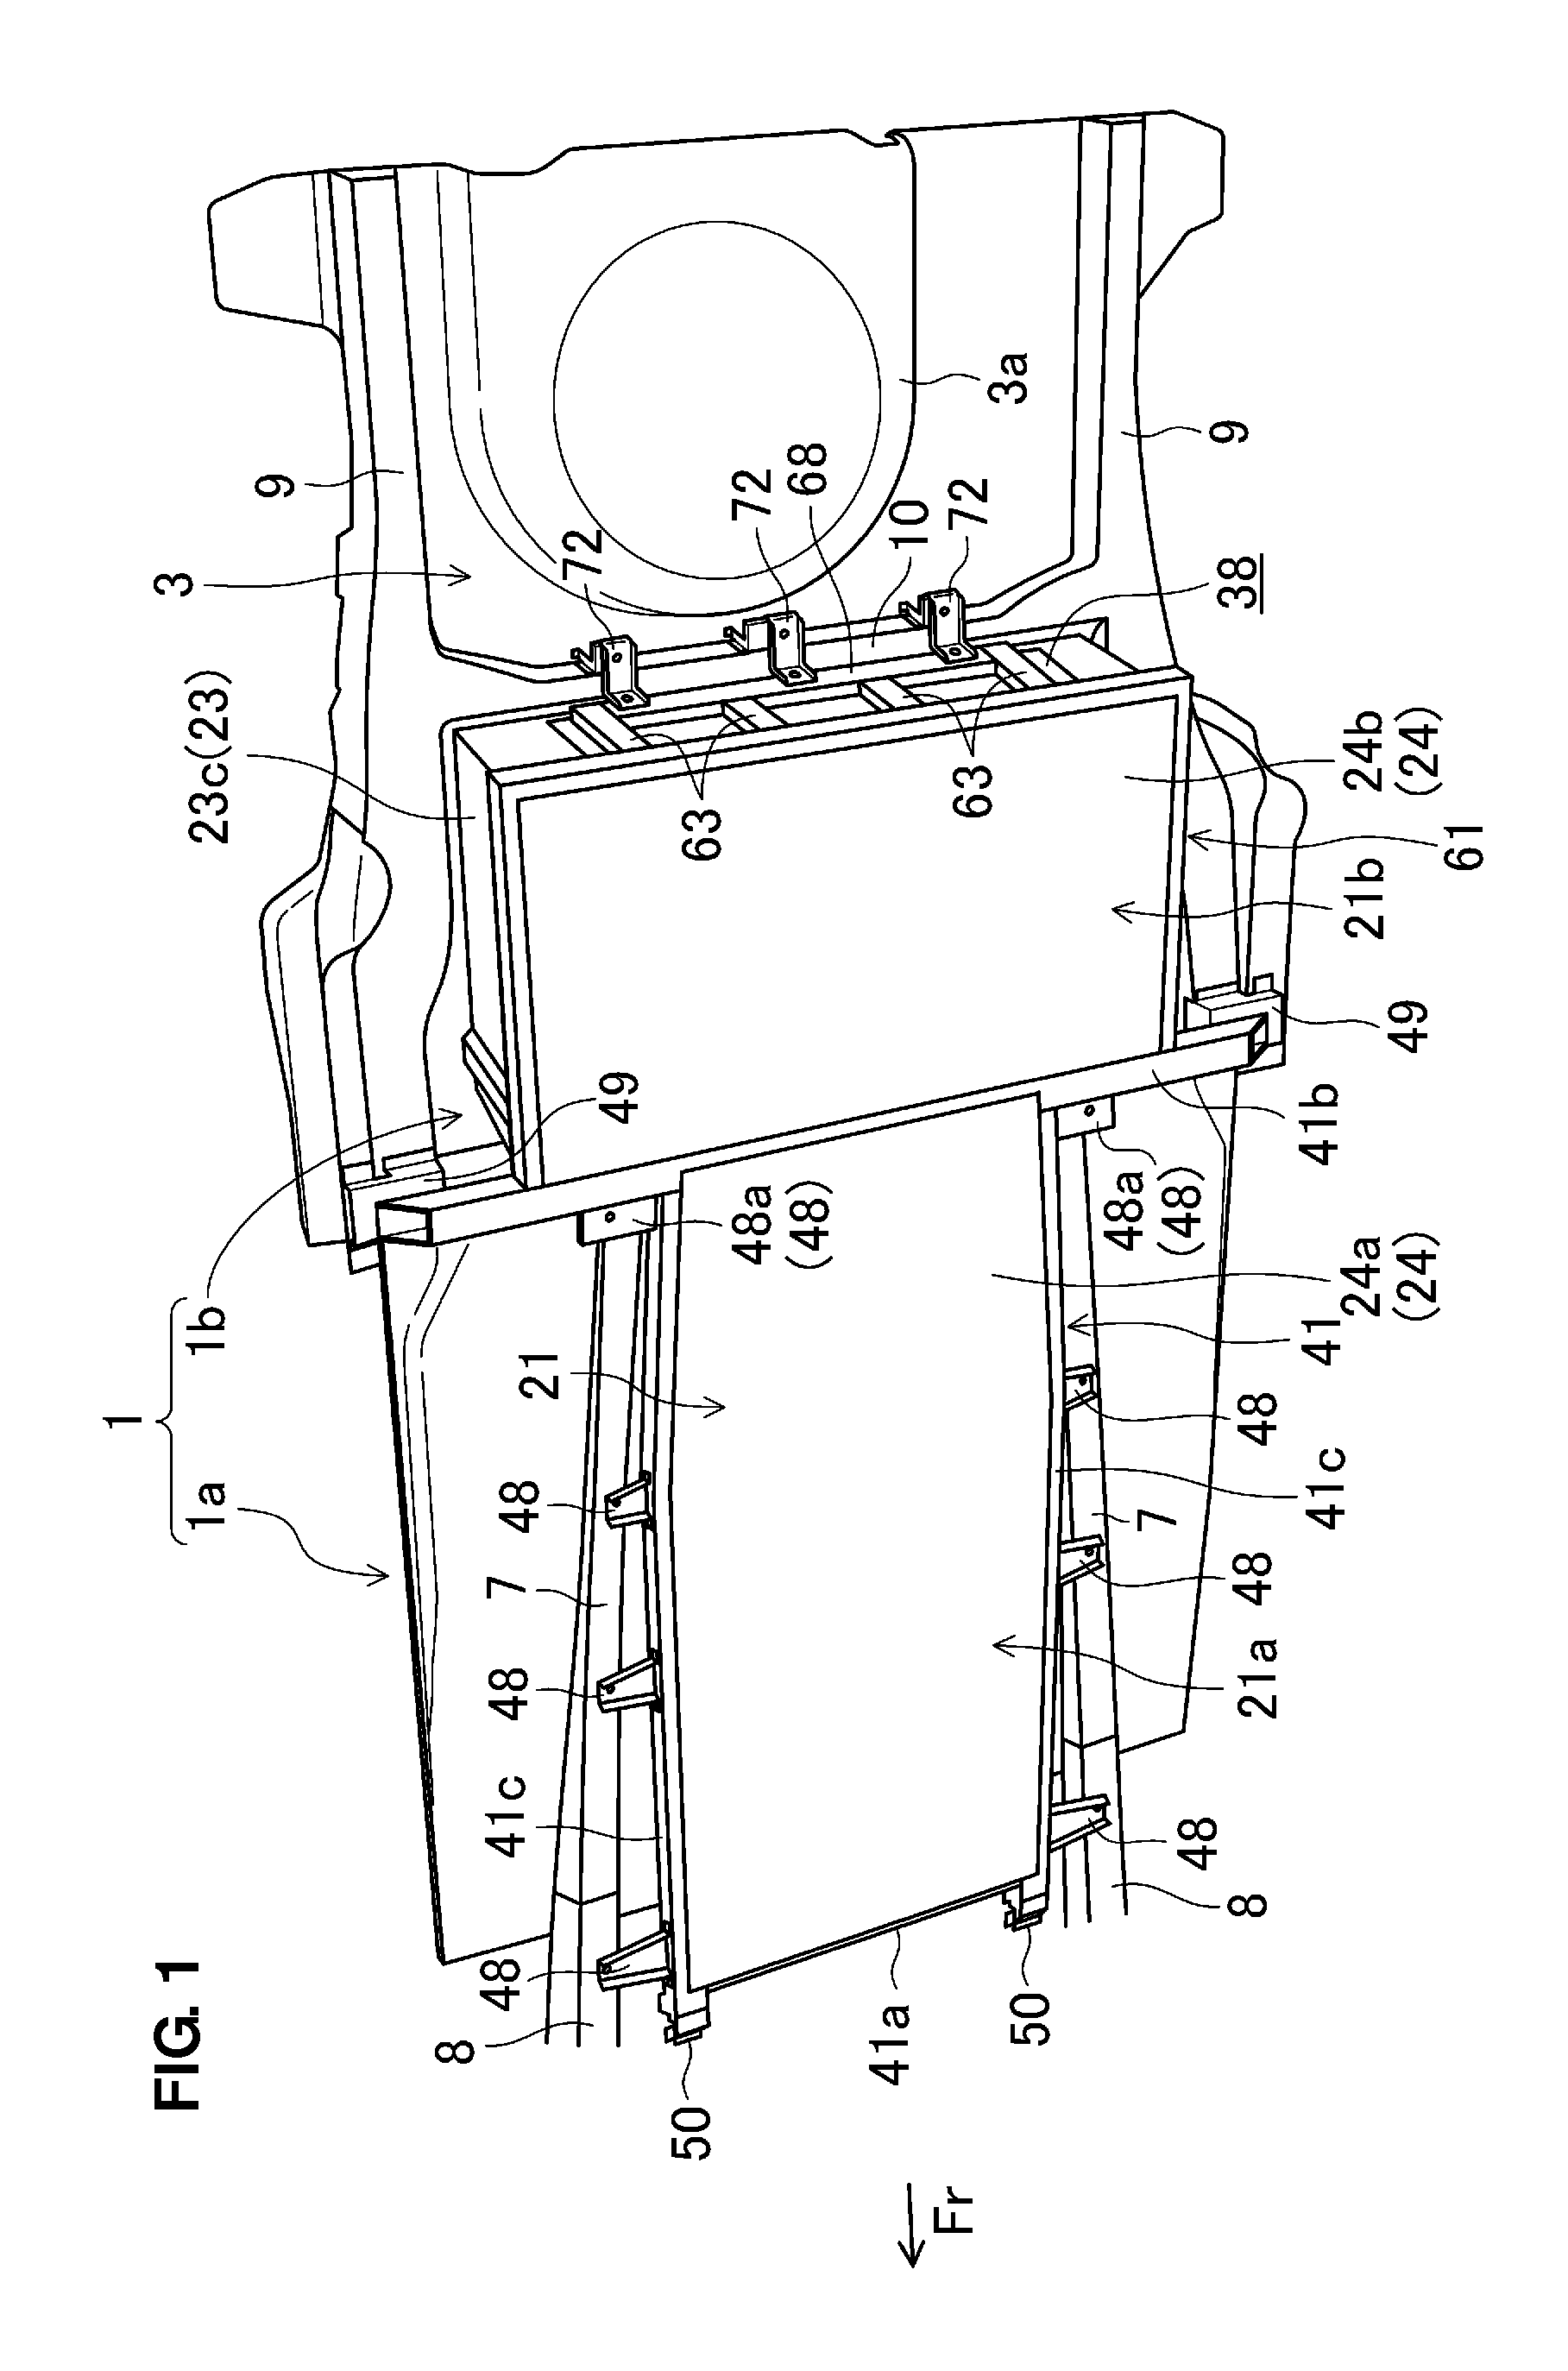 Battery mounting structure of electromotive vehicle